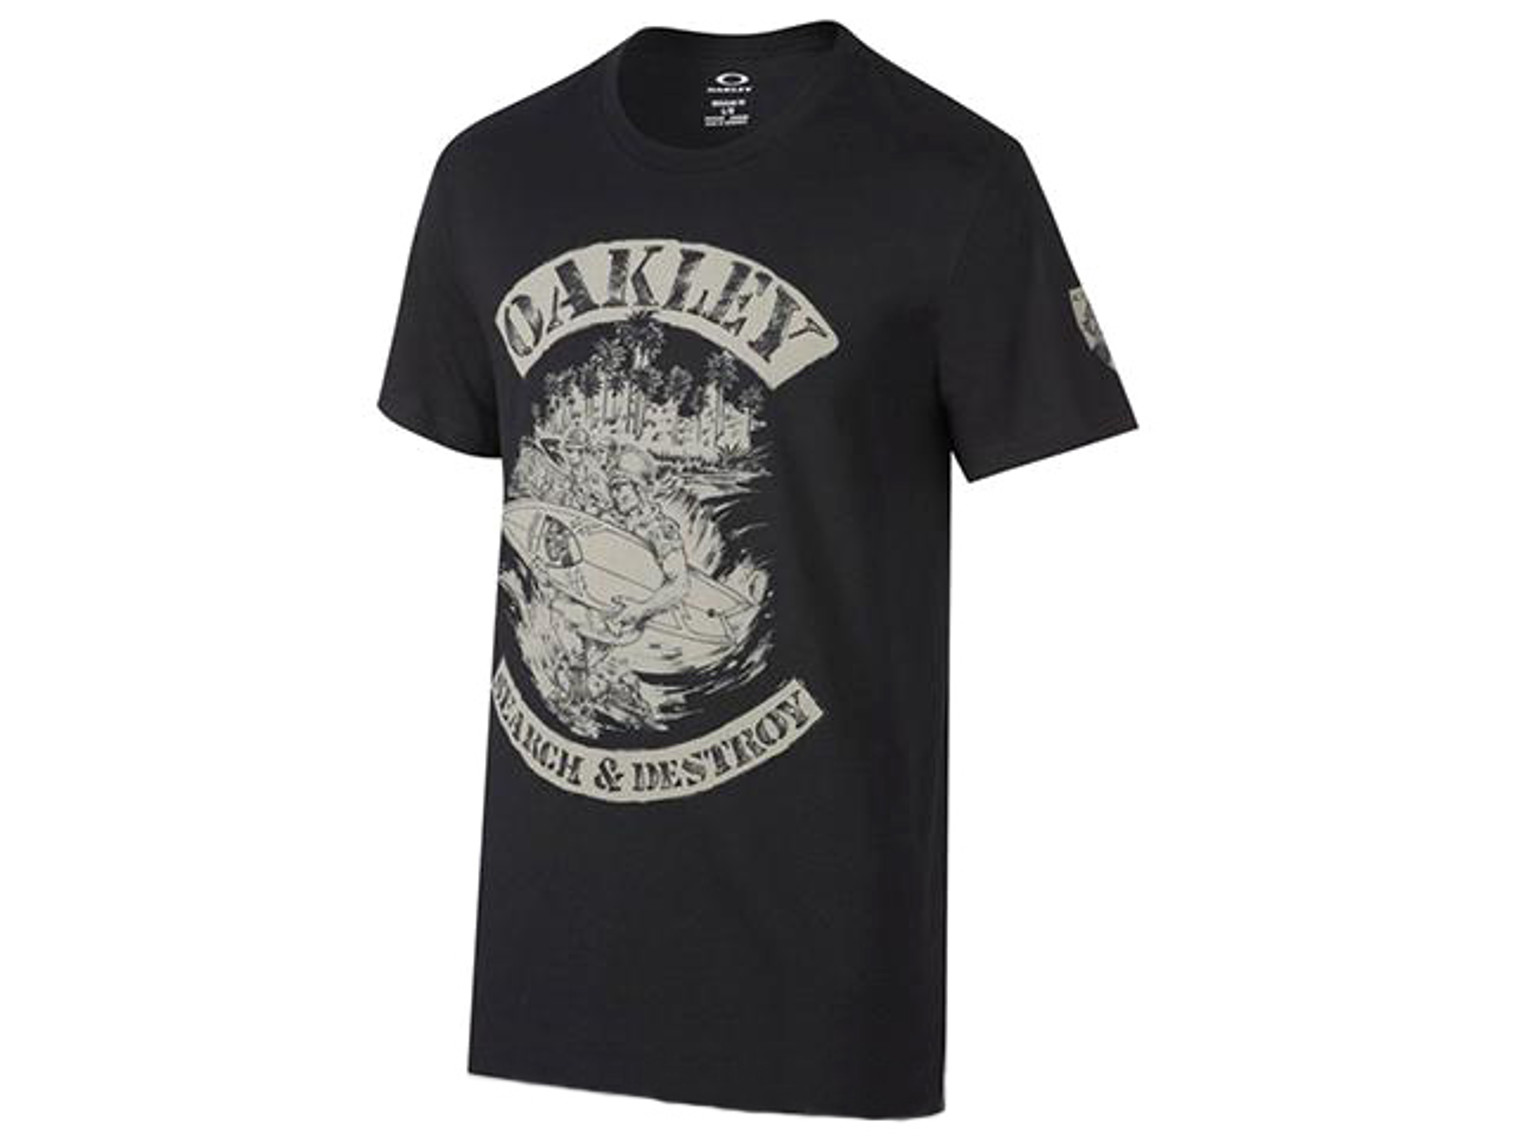 Oakley SI Search and Destroy T-Shirt - Jet Black (Size: Medium)